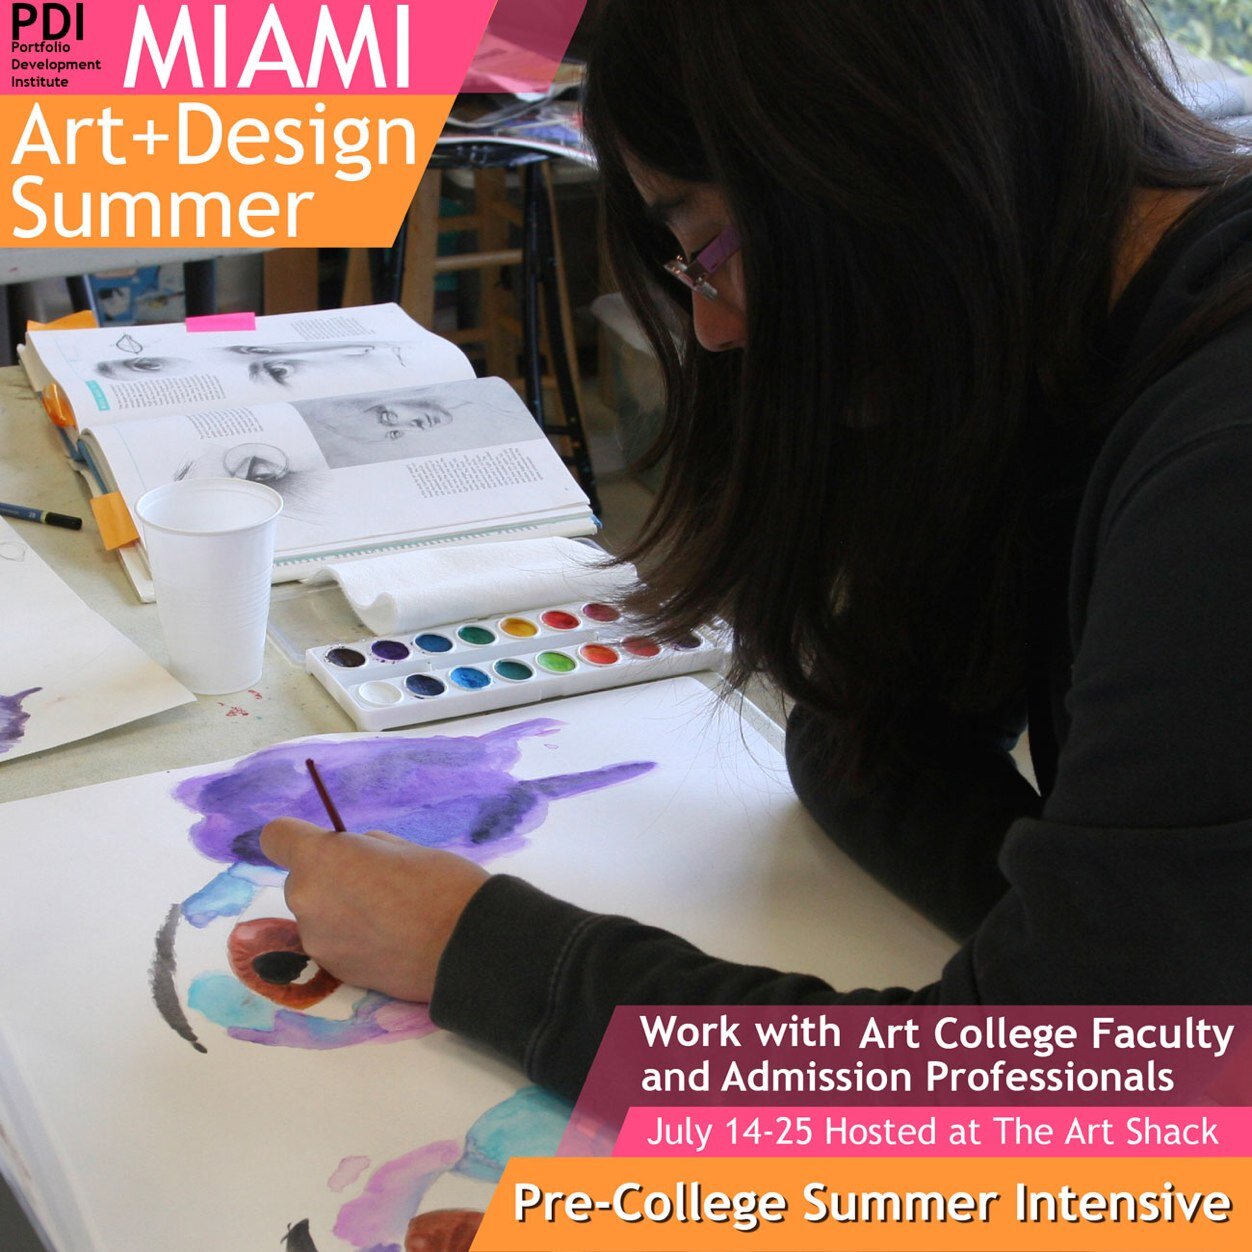 PDI-Miami provides portfolio development courses, elective courses in art & design and advising for students interested in studying art and design in College